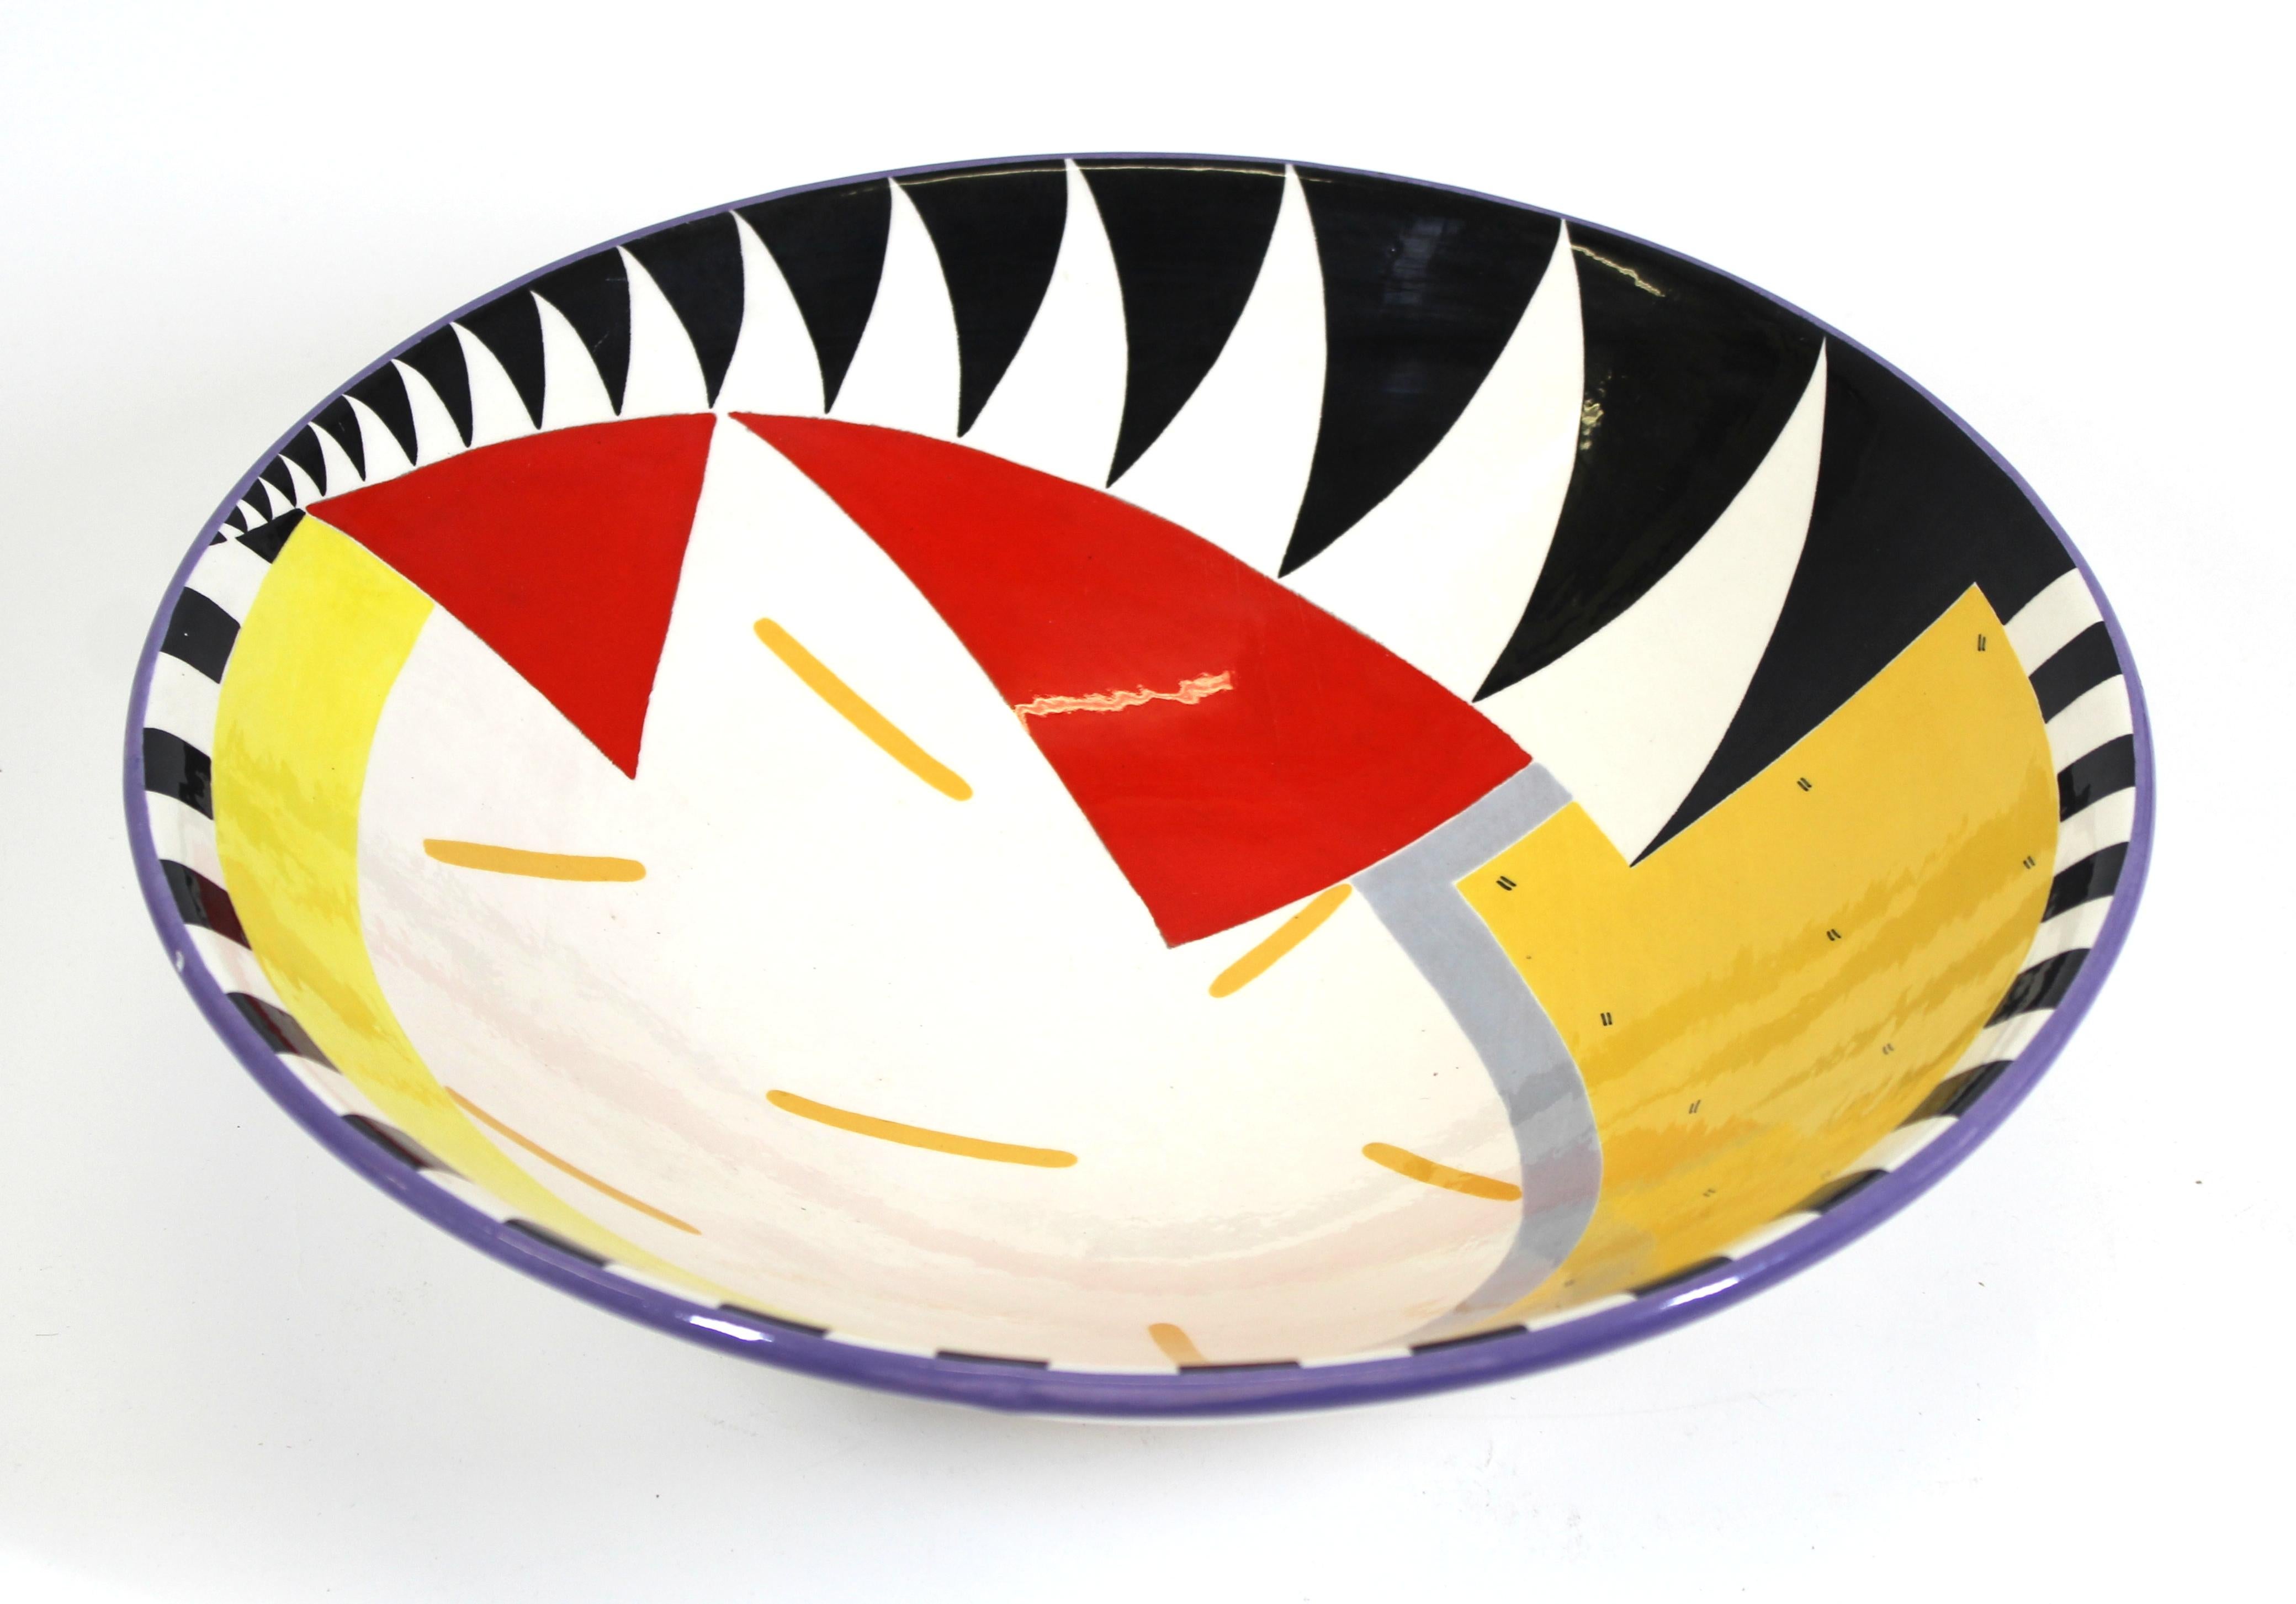 Susan Eslick American Postmodern art pottery hand painted bowl, signed and dated 1989 on the bottom.